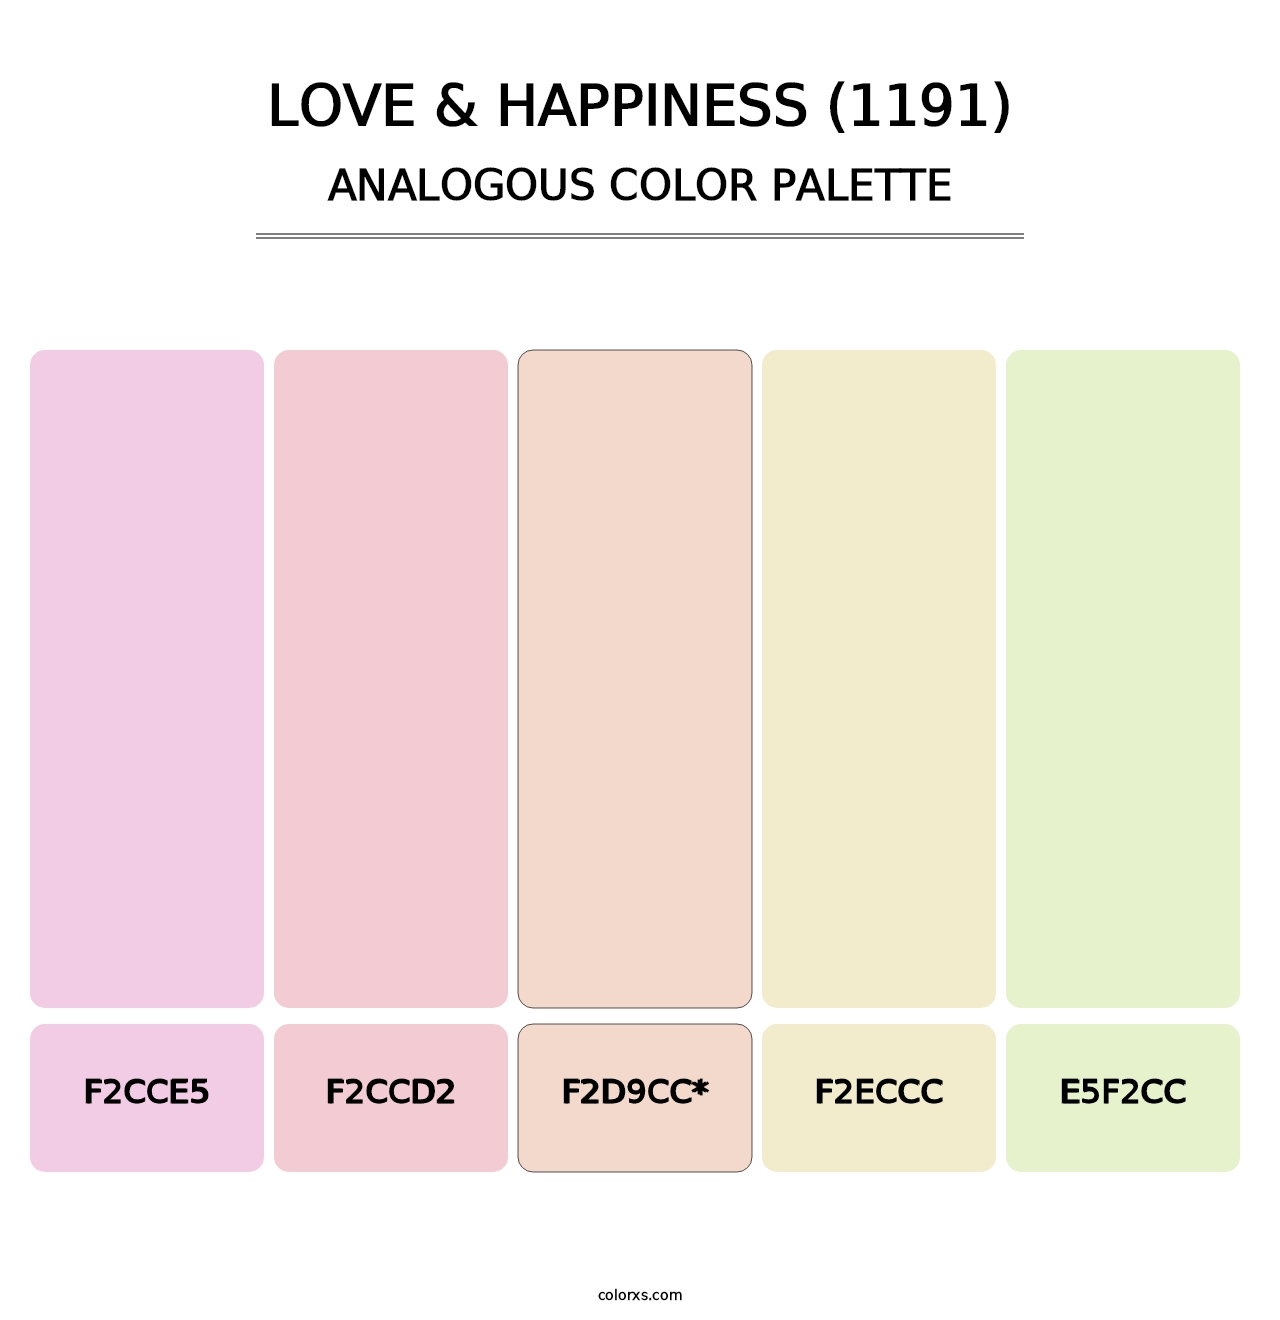 Love & Happiness (1191) - Analogous Color Palette